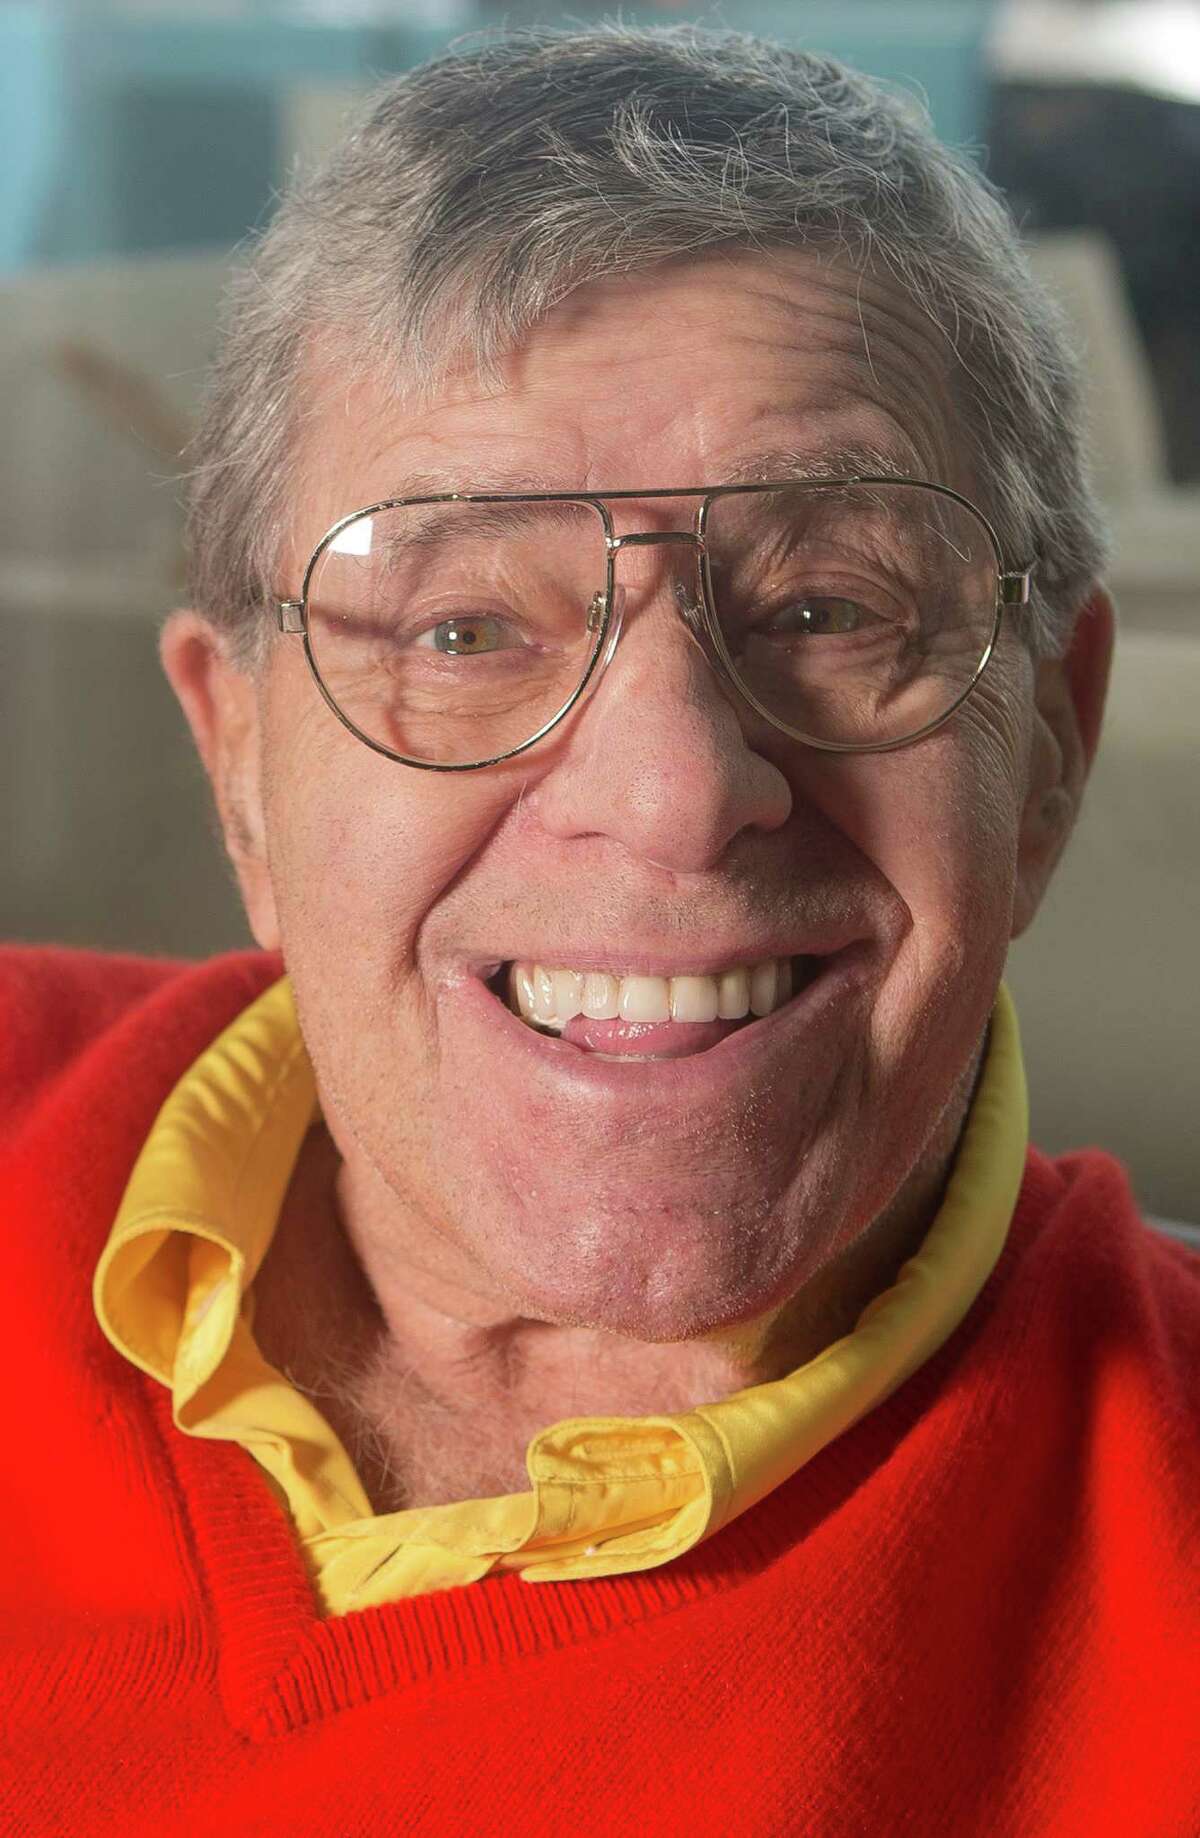 Comedian Jerry Lewis poses for portraits at the 66th international film festival, in Cannes, southern France, Friday, May 24, 2013. (Photo by Joel Ryan/Invision/AP)